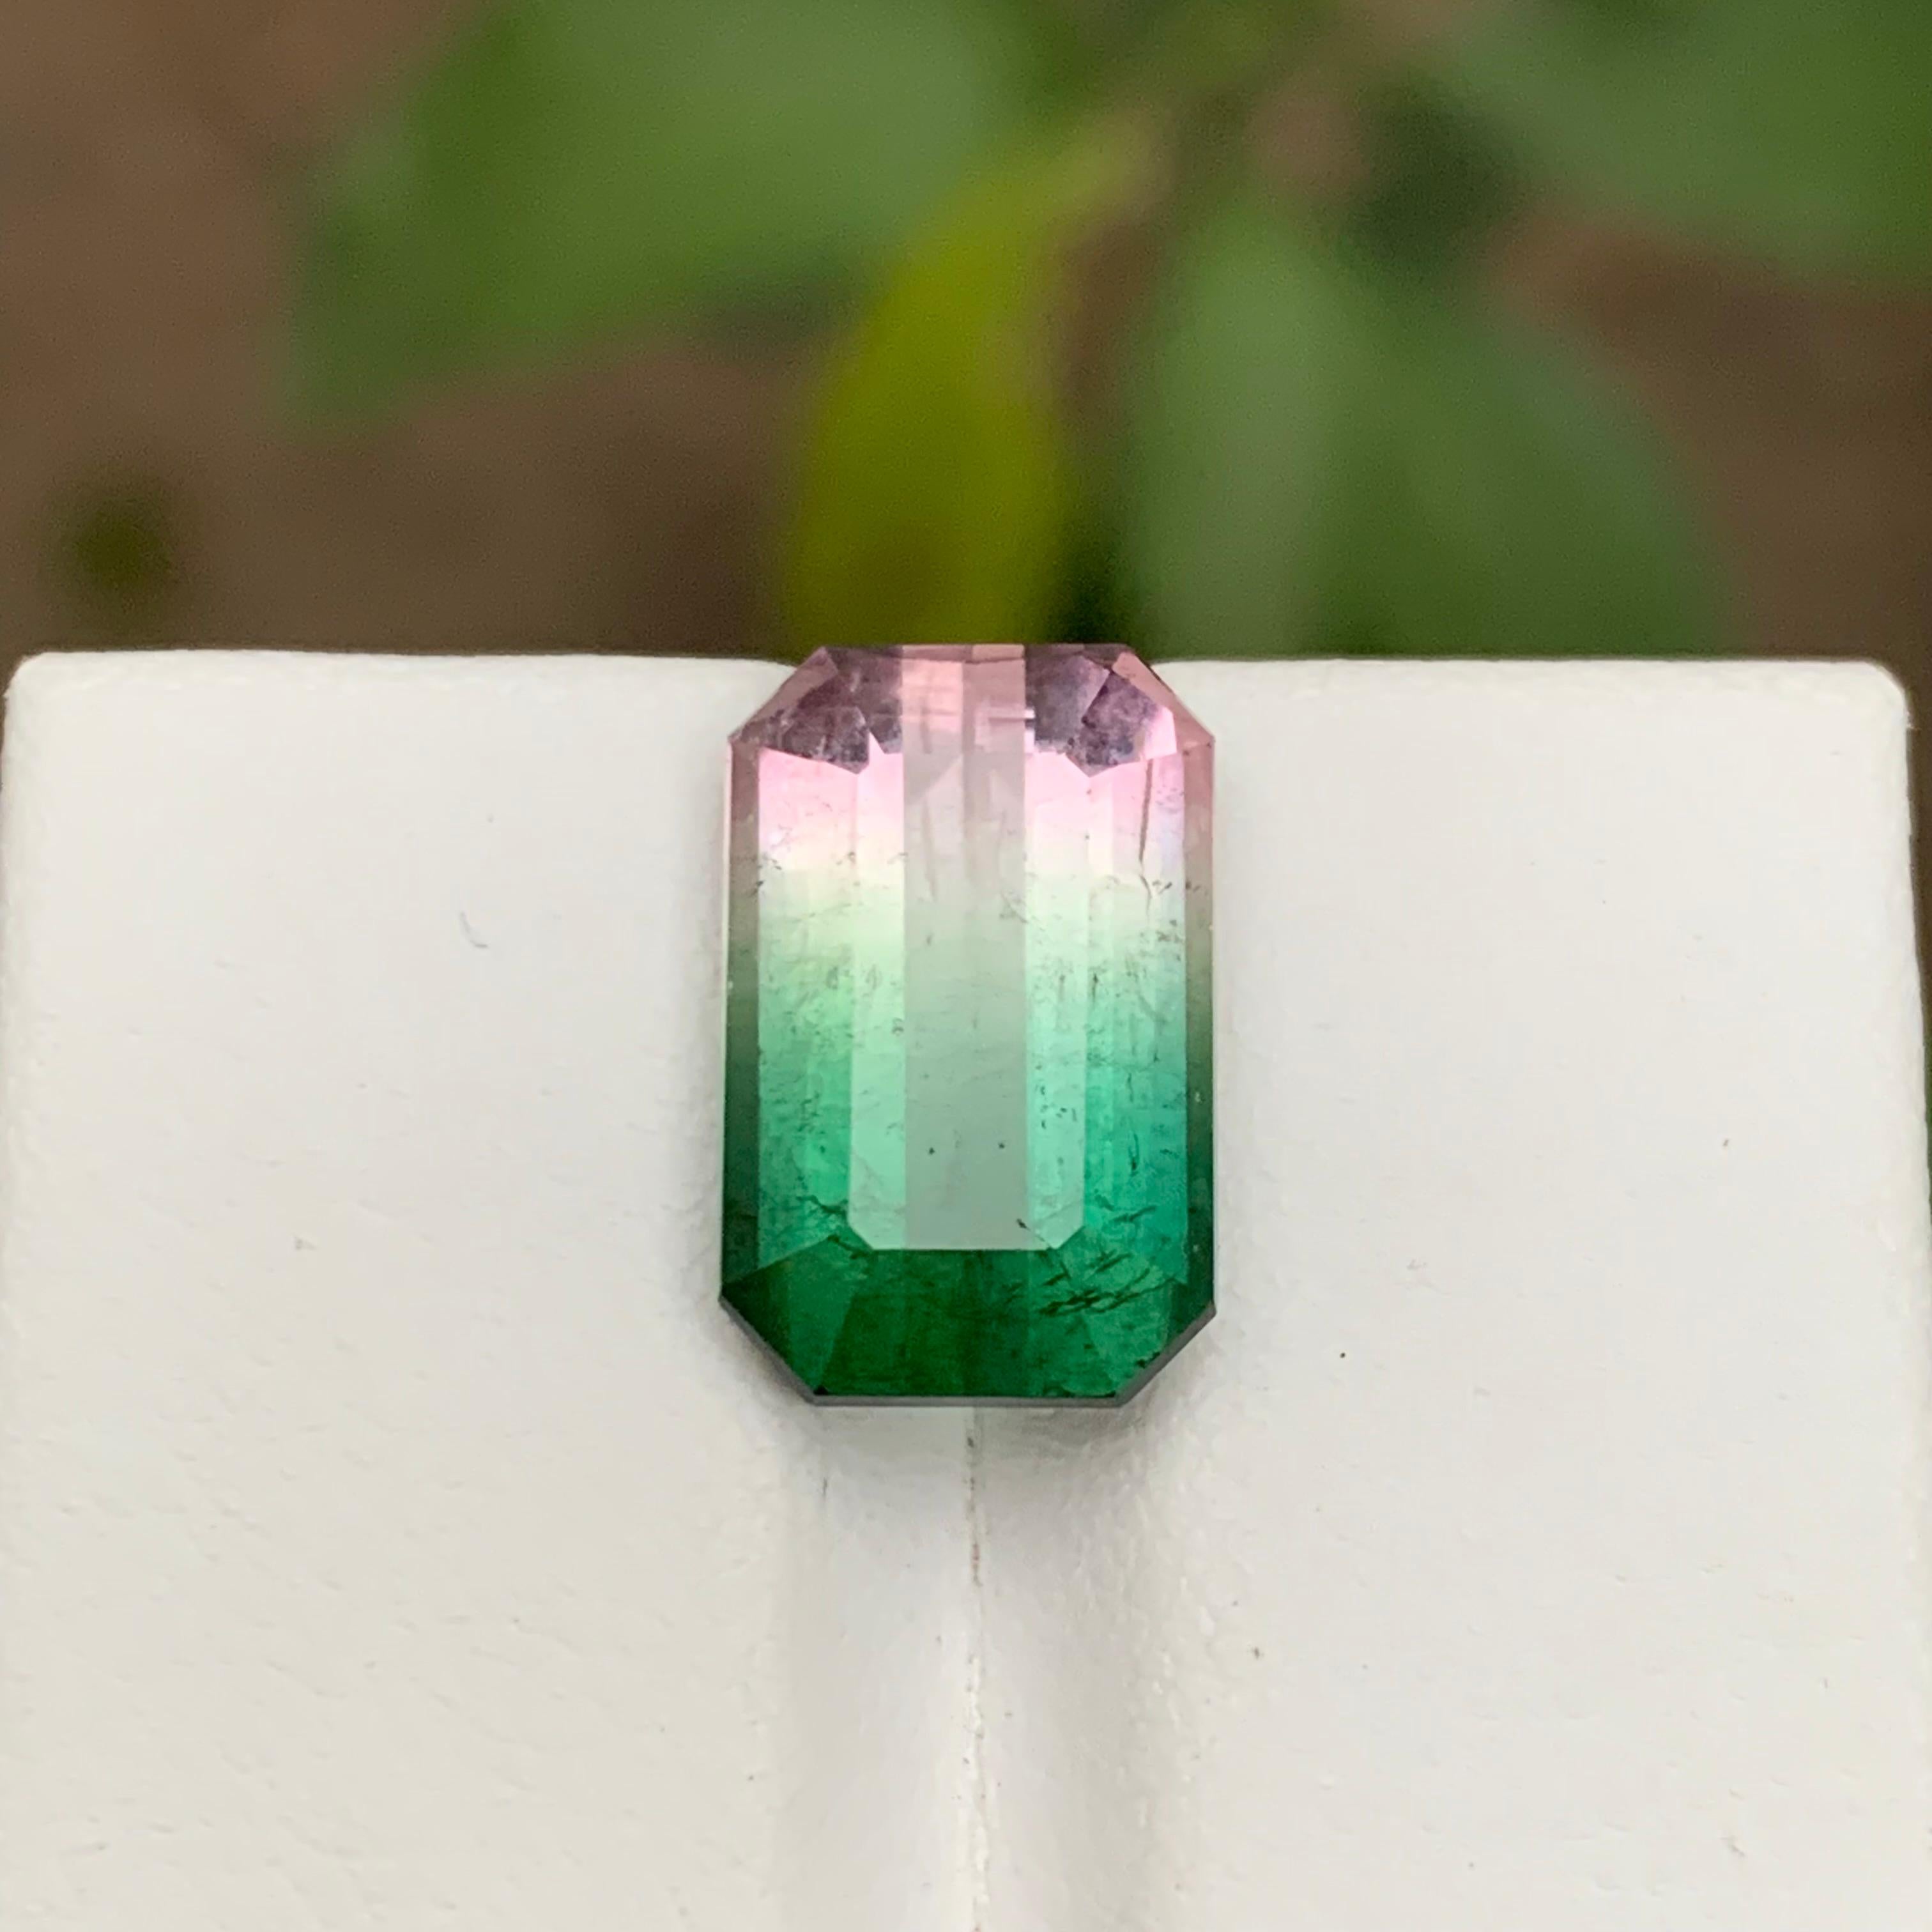 Rare Watermelon Bicolor Bluish Green & Pink Tourmaline Gemstone 7.30 Ct for Ring For Sale 3